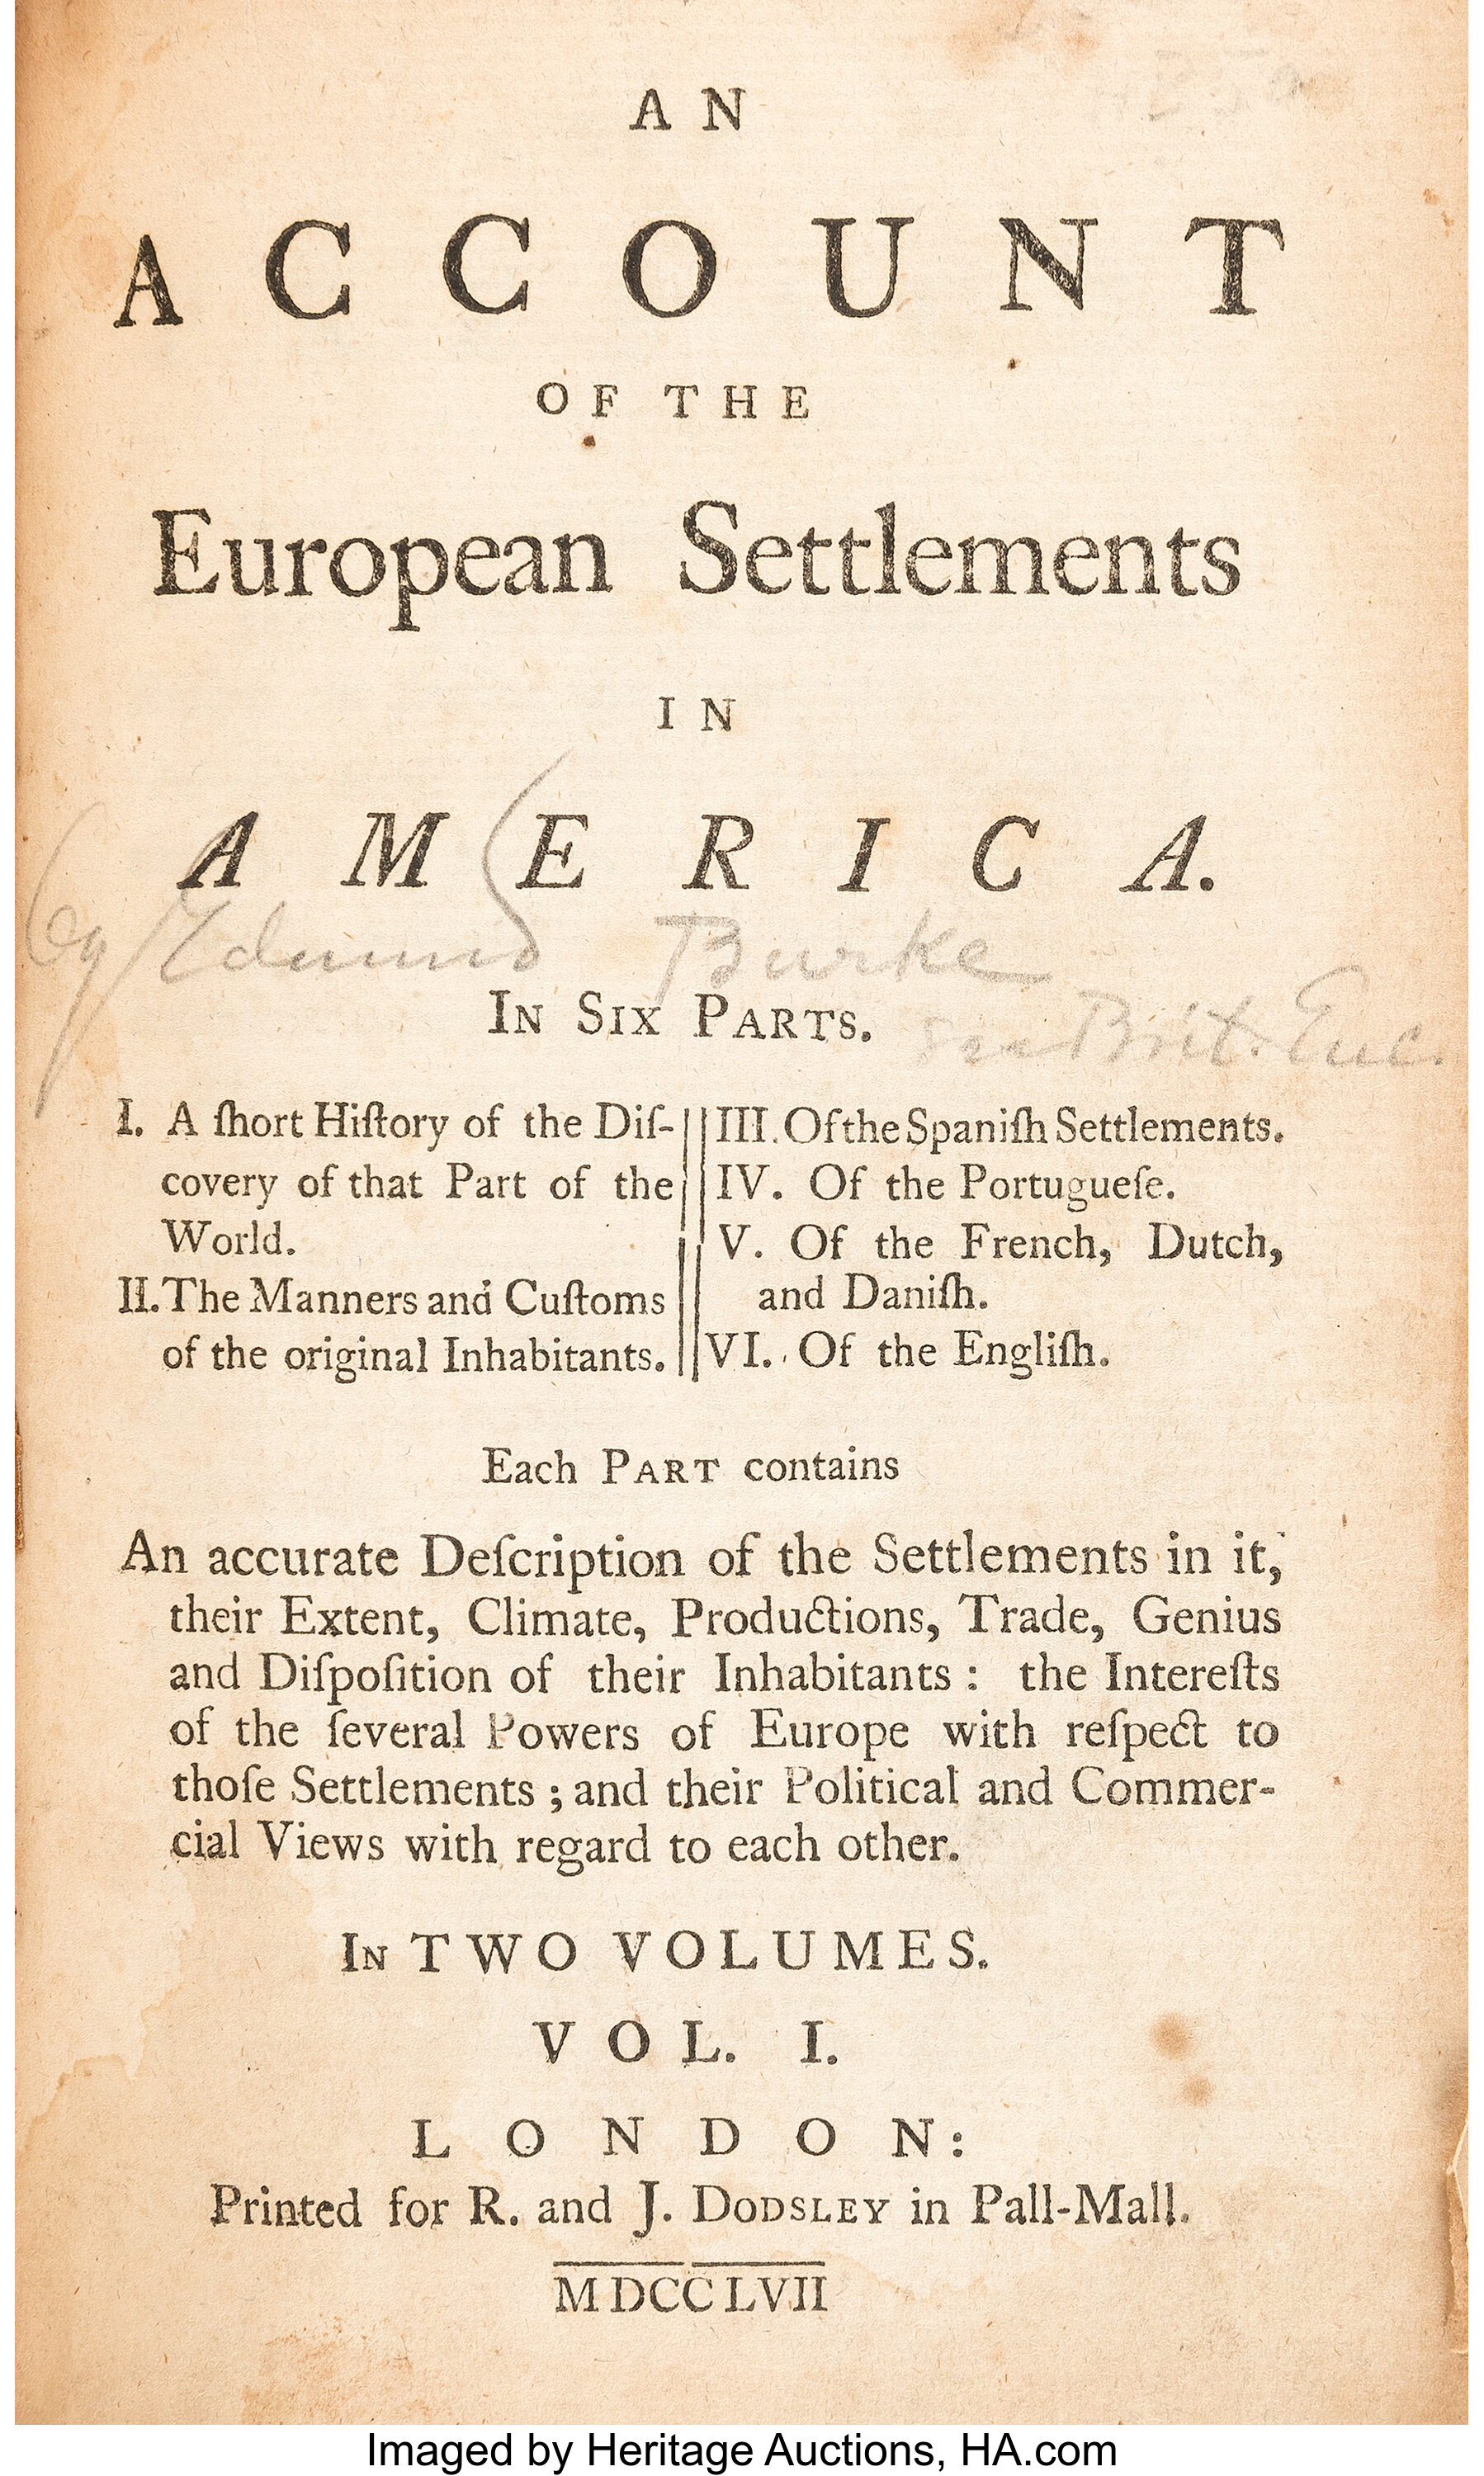 Edmund Burke An Account Of The European Settlements In America Lot Heritage Auctions